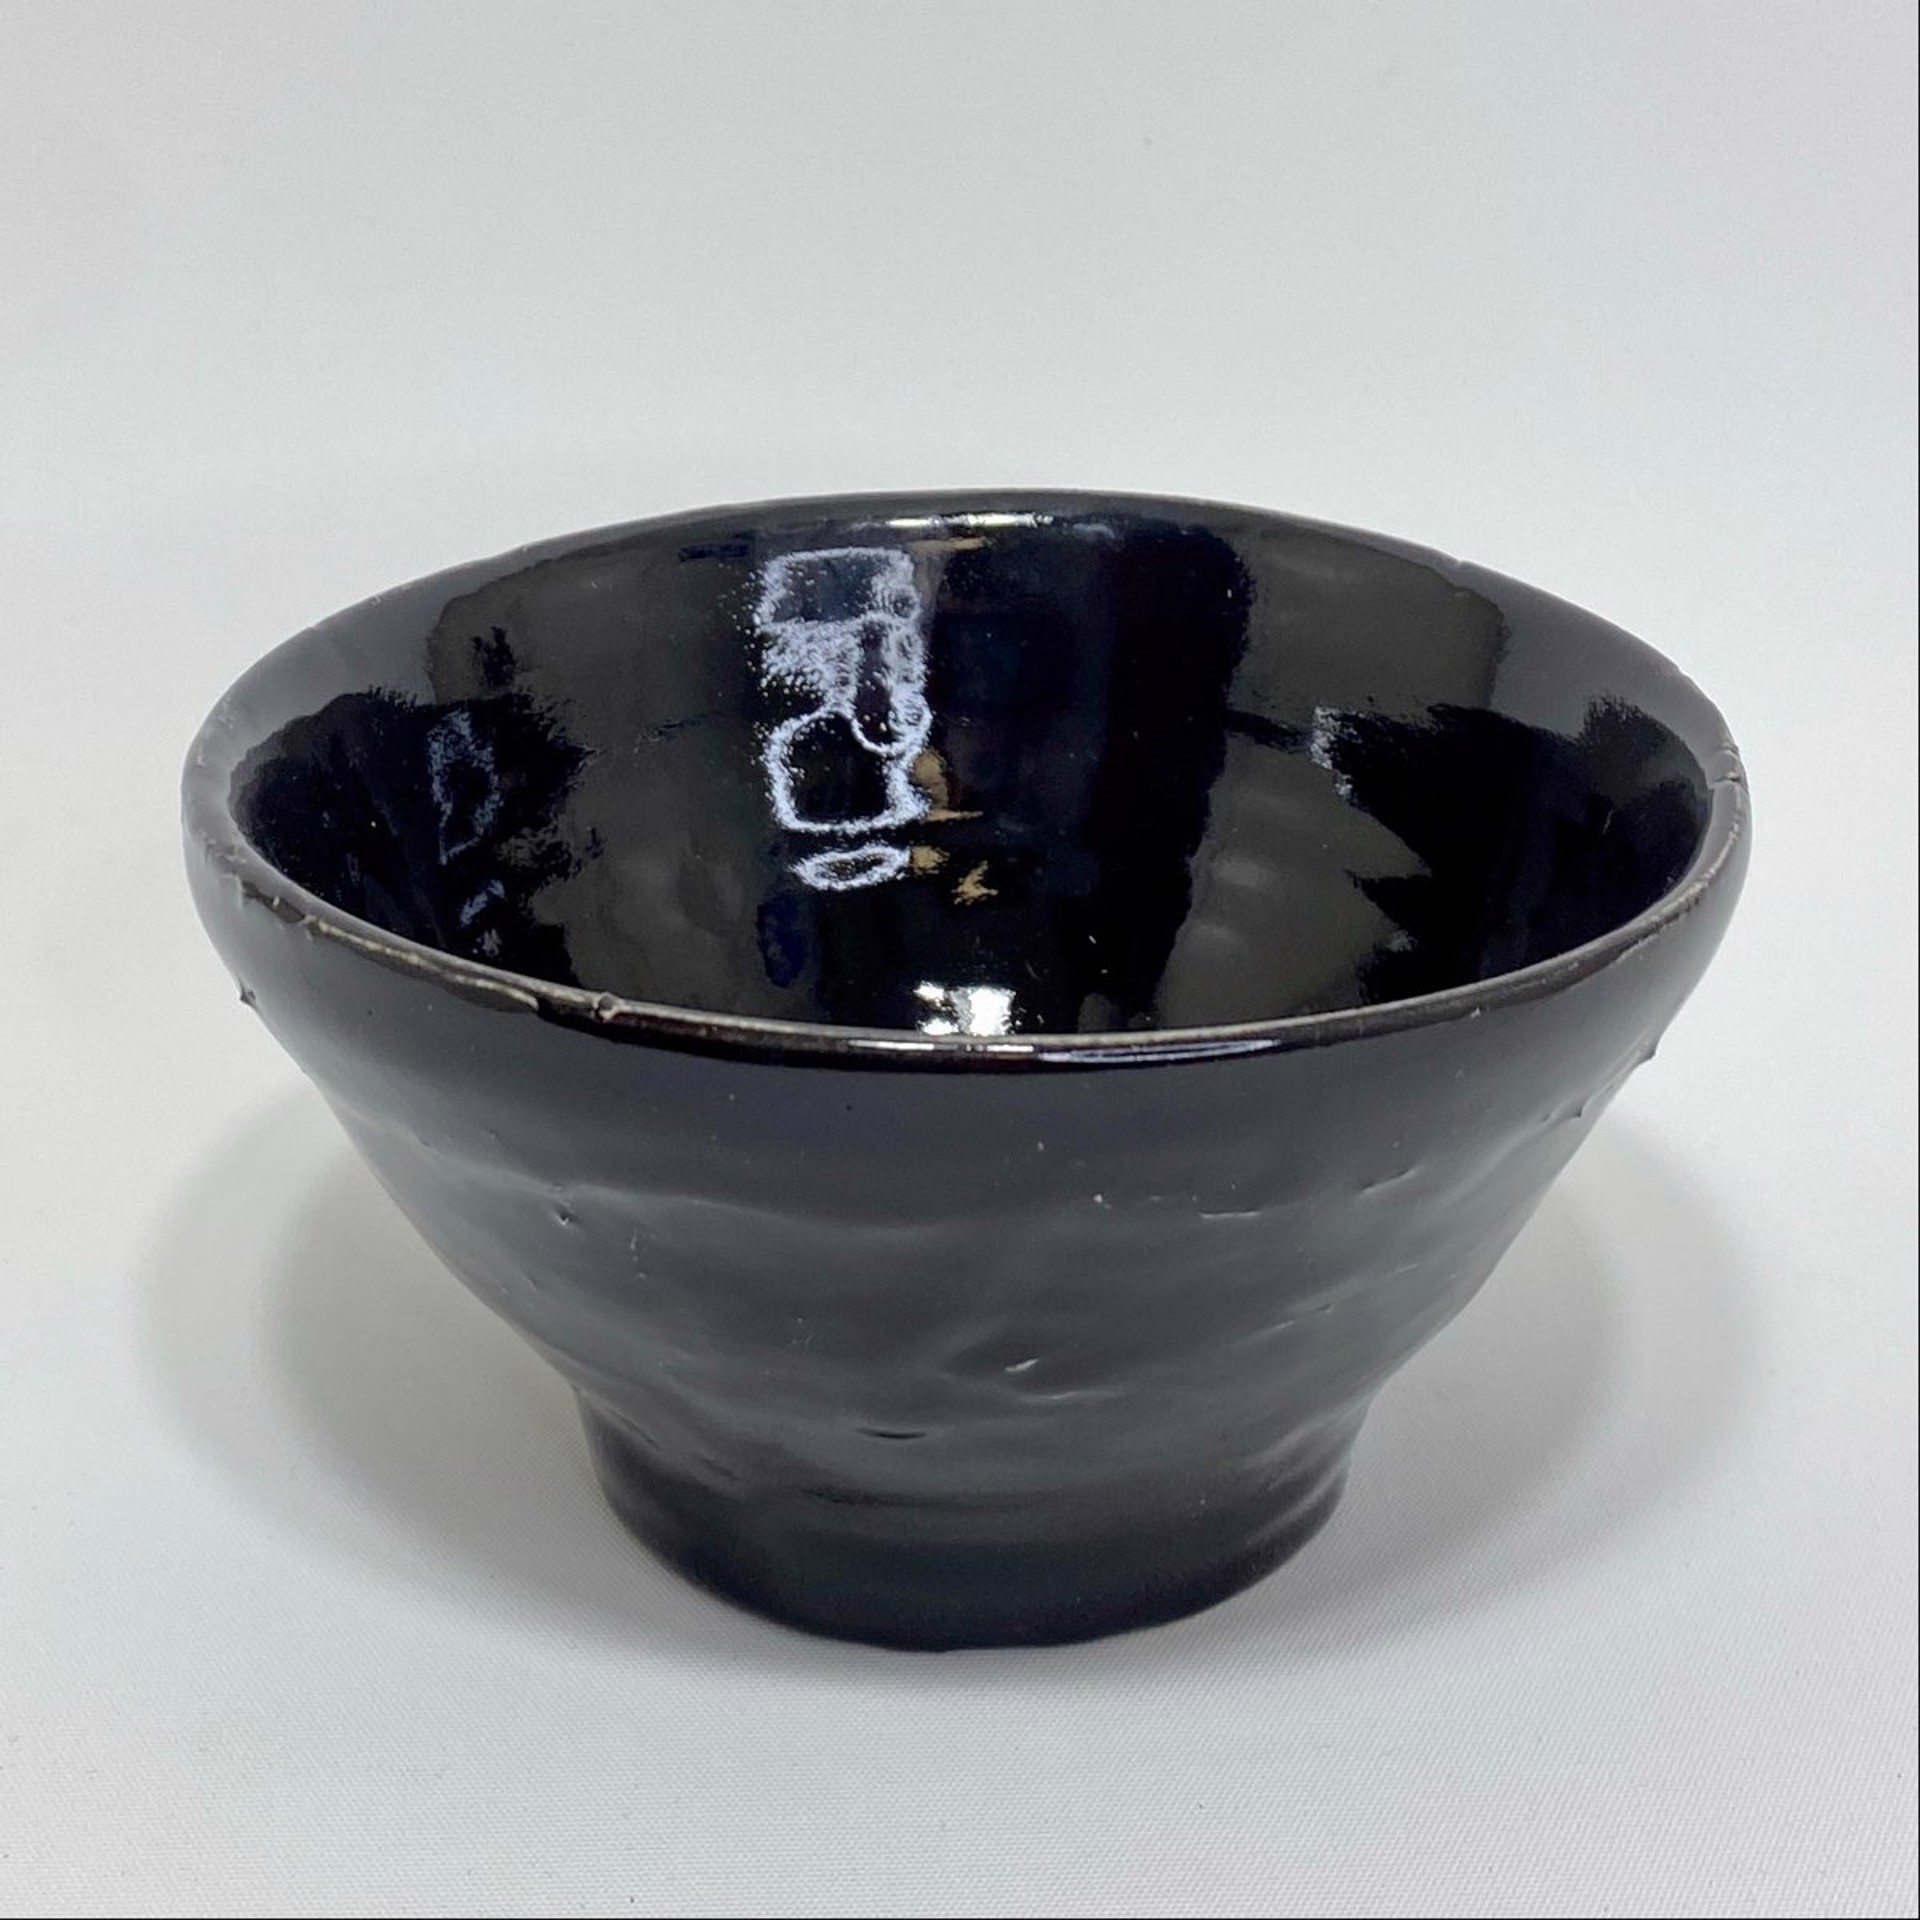 "Small Black Bowl" by Laura B. by One Step Beyond Group